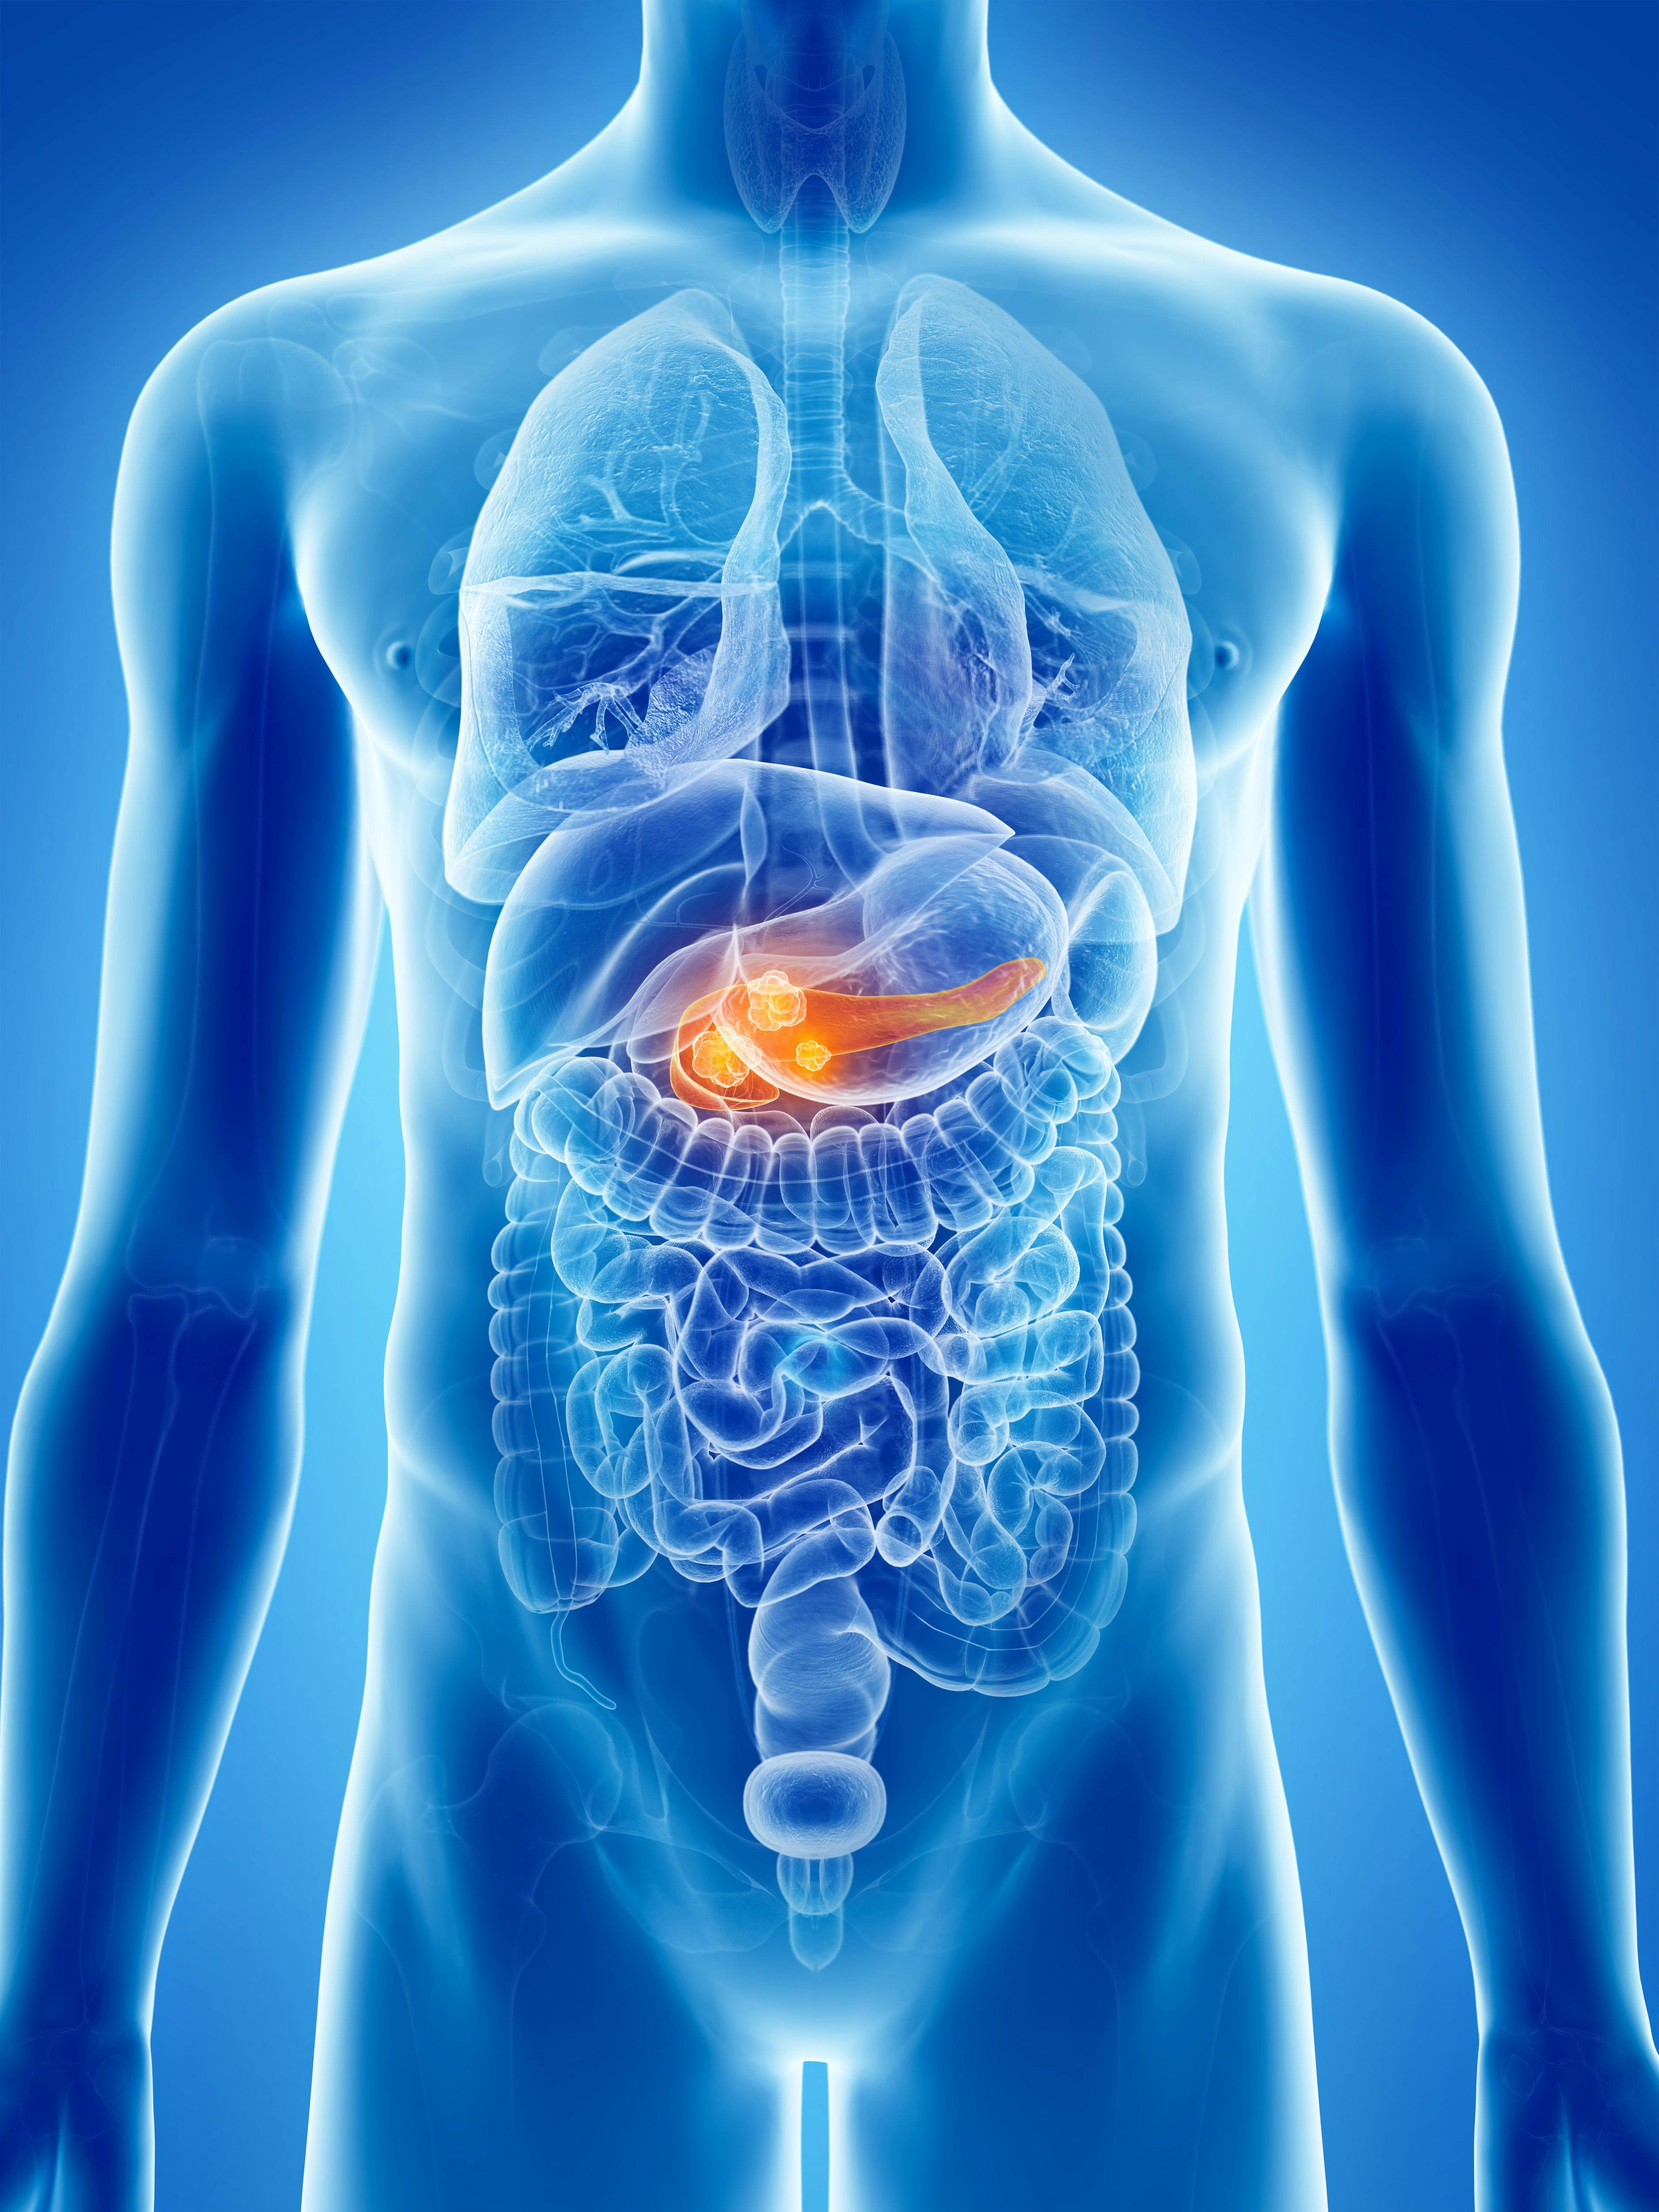 Positive Results Seen in Trial Investigating Nadunolimab Plus Chemotherapy for Advanced Pancreatic Cancer